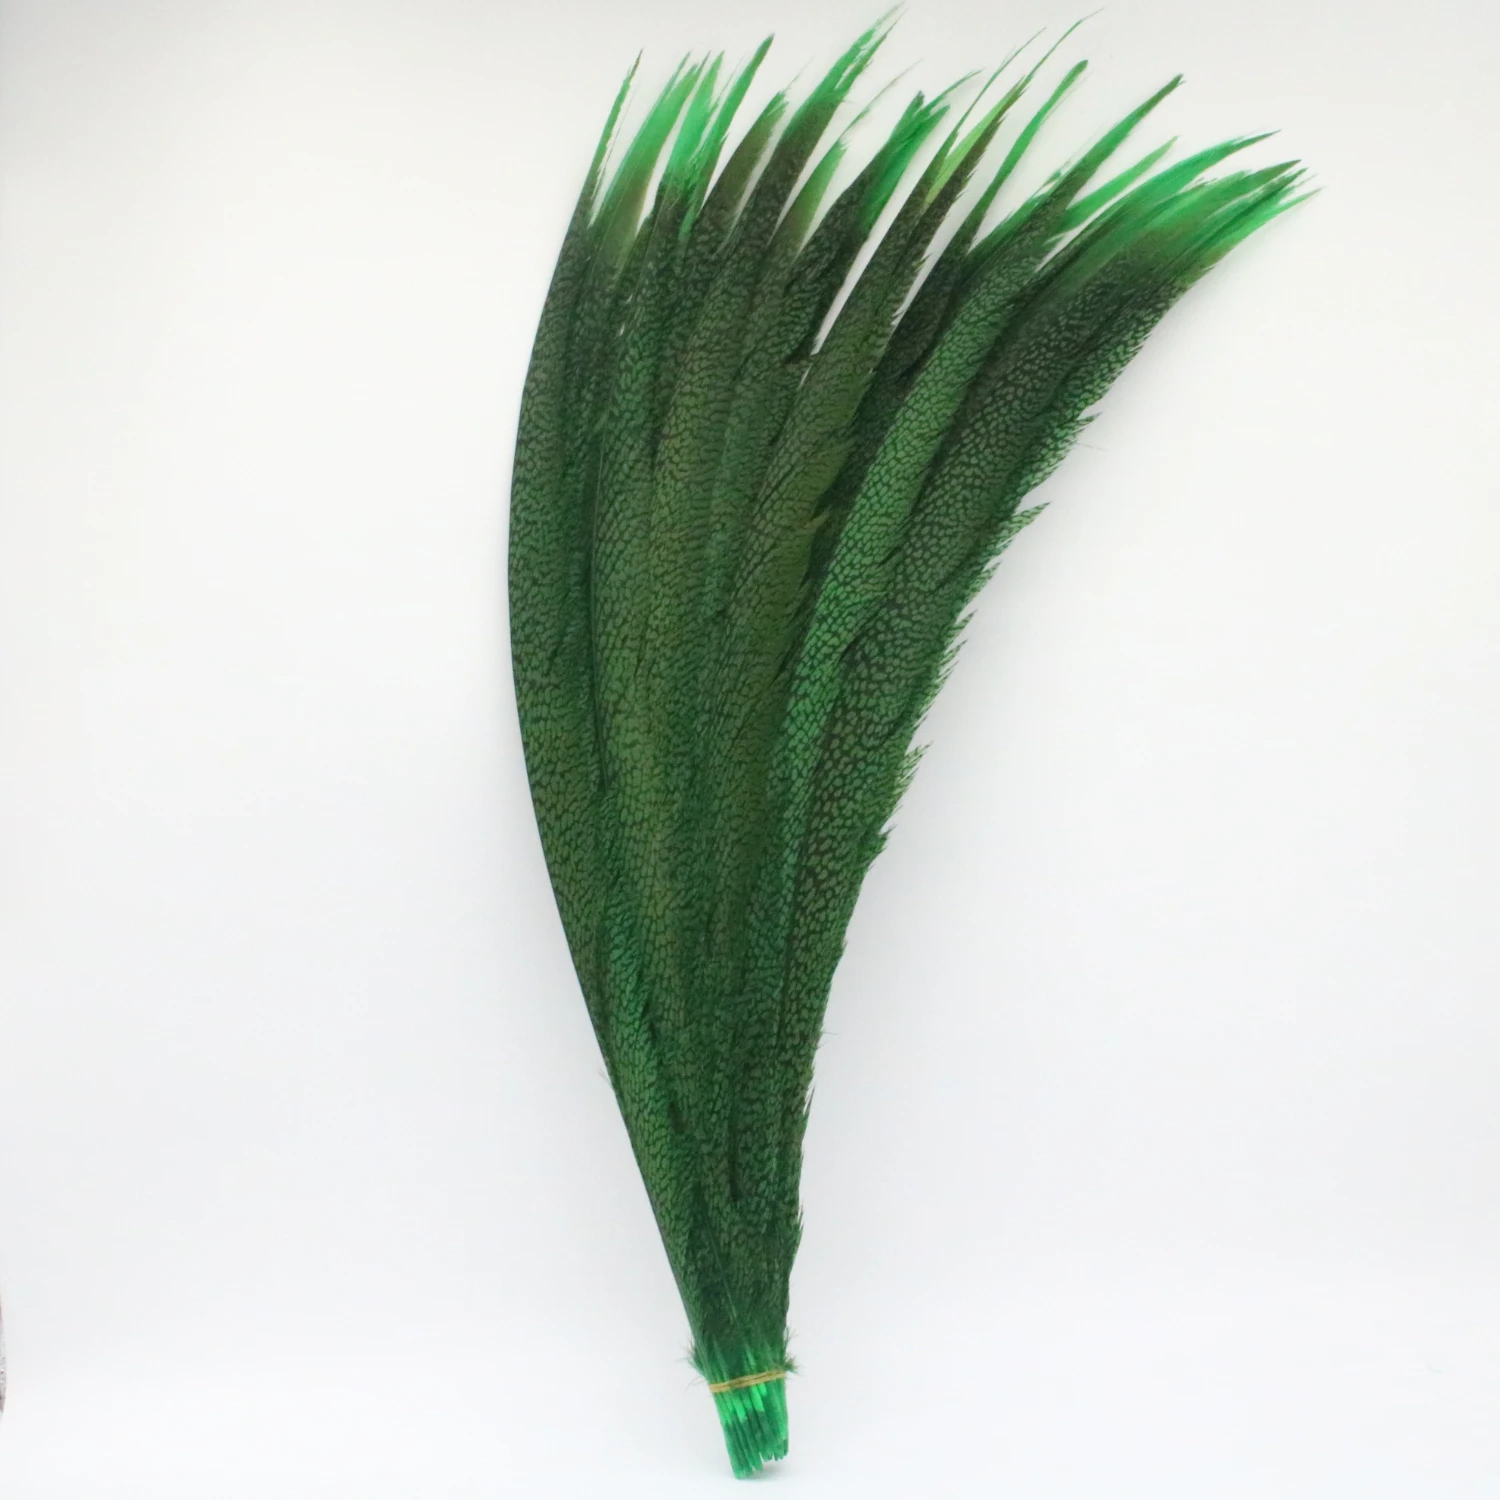 Wholesale 24-28inch/60-70cm Dyed Green Pheasant Tail Feathers Carnival Party DIY Decoration Lady Amherst Pheasant Feathers